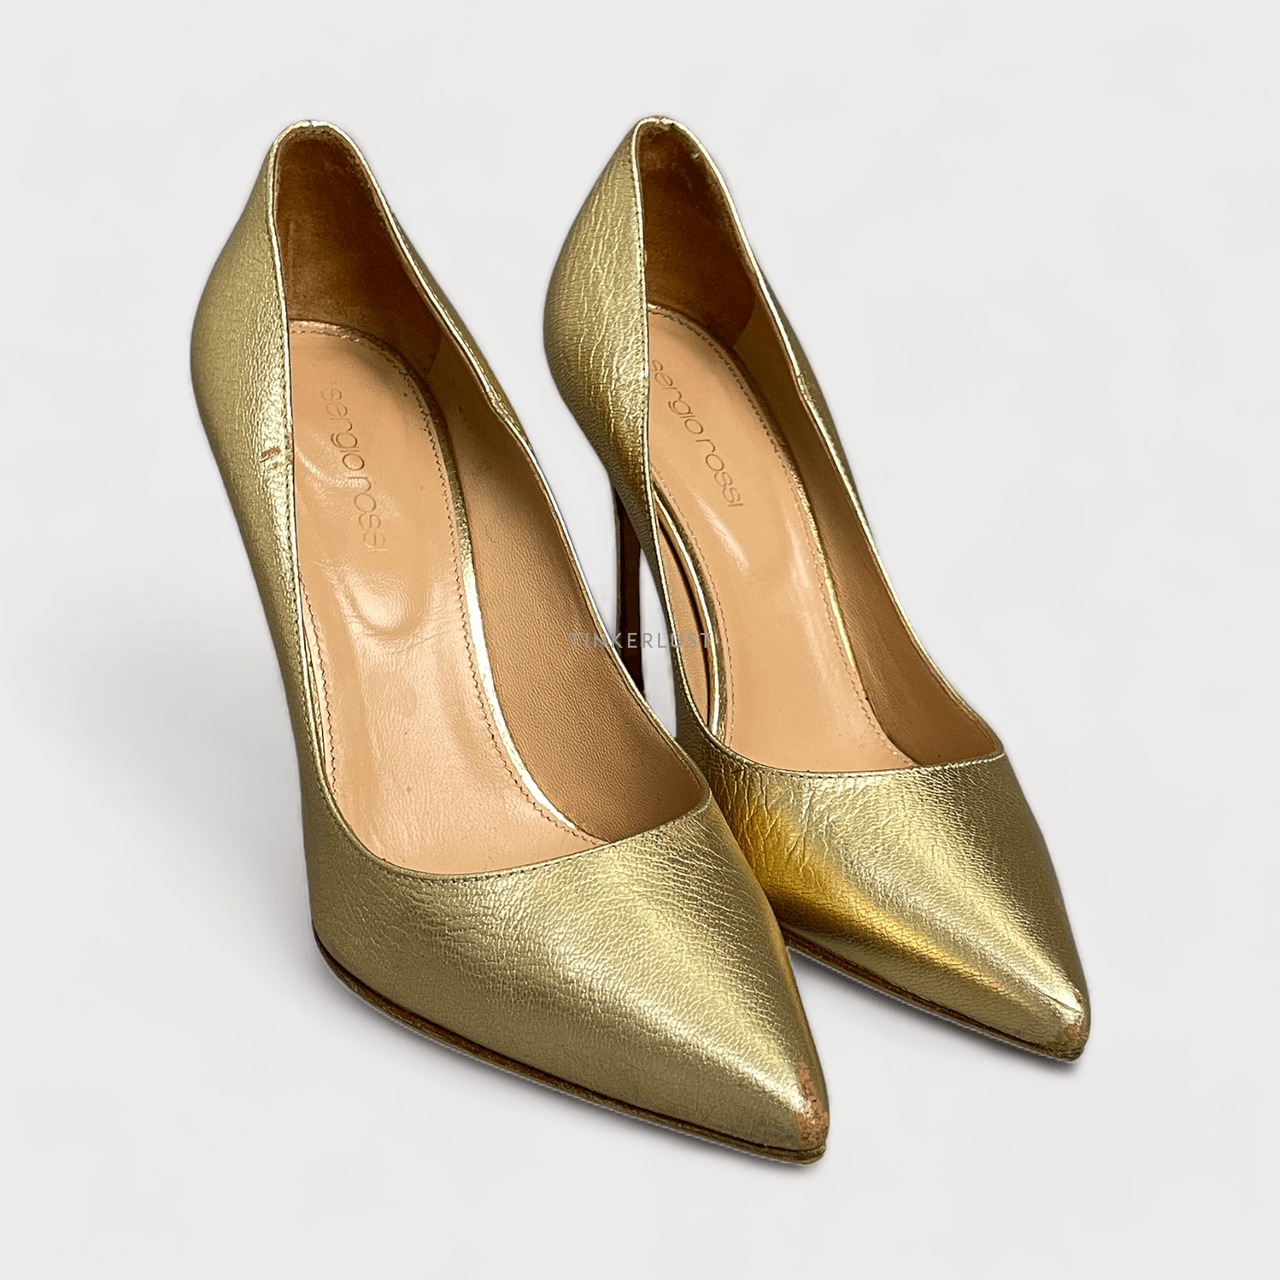 Sergio Rossi Pointed Toe Gold Leather Heels